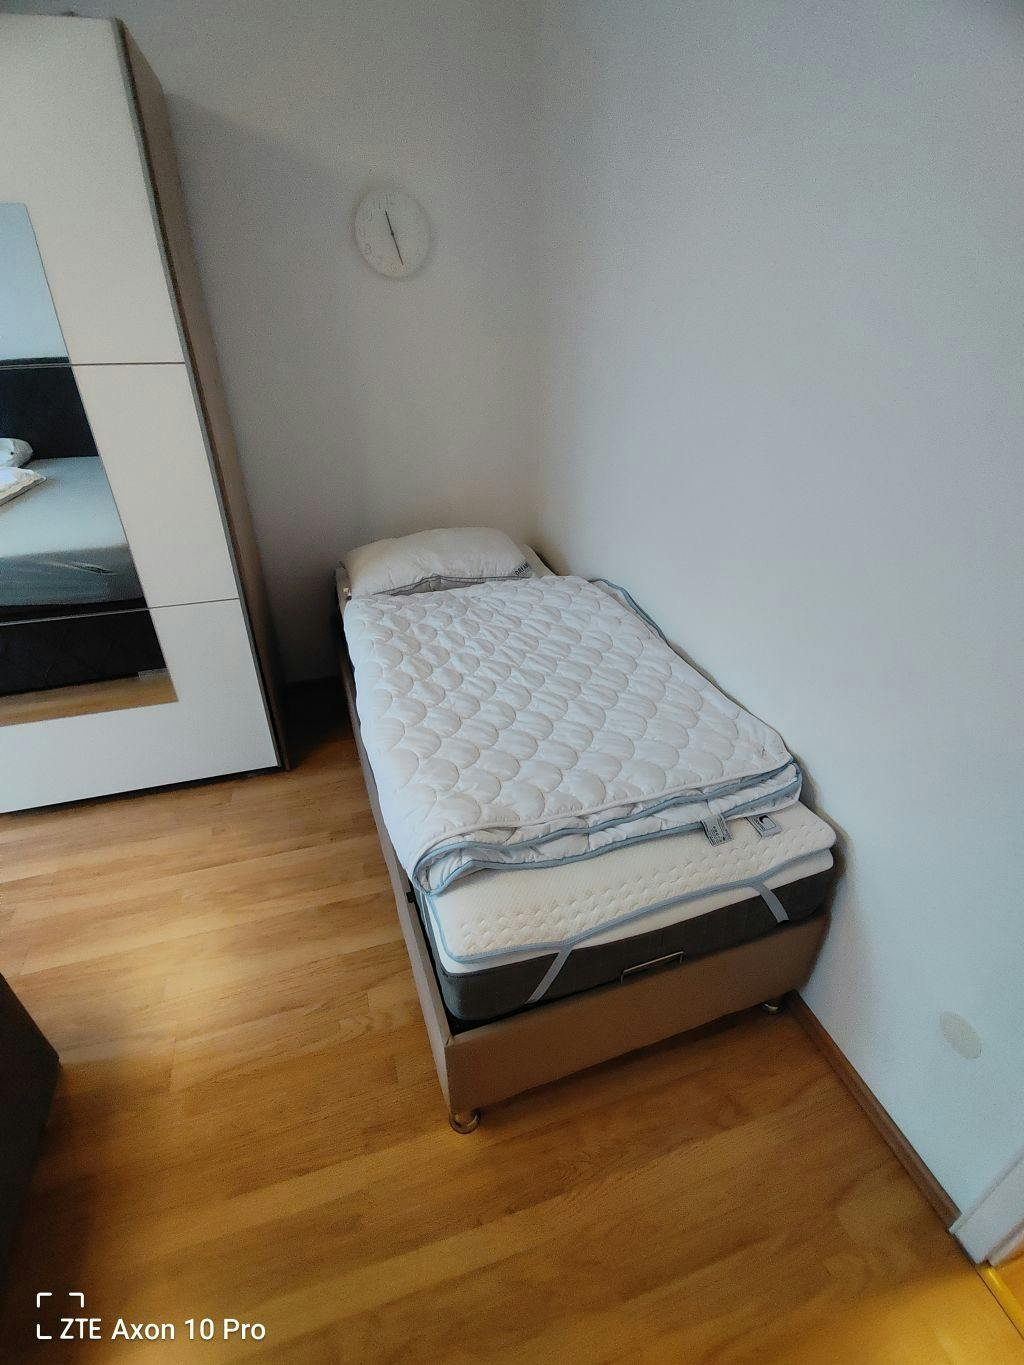 Modern design flat in Essen - centrally located - Manager flat - Temporary Residence